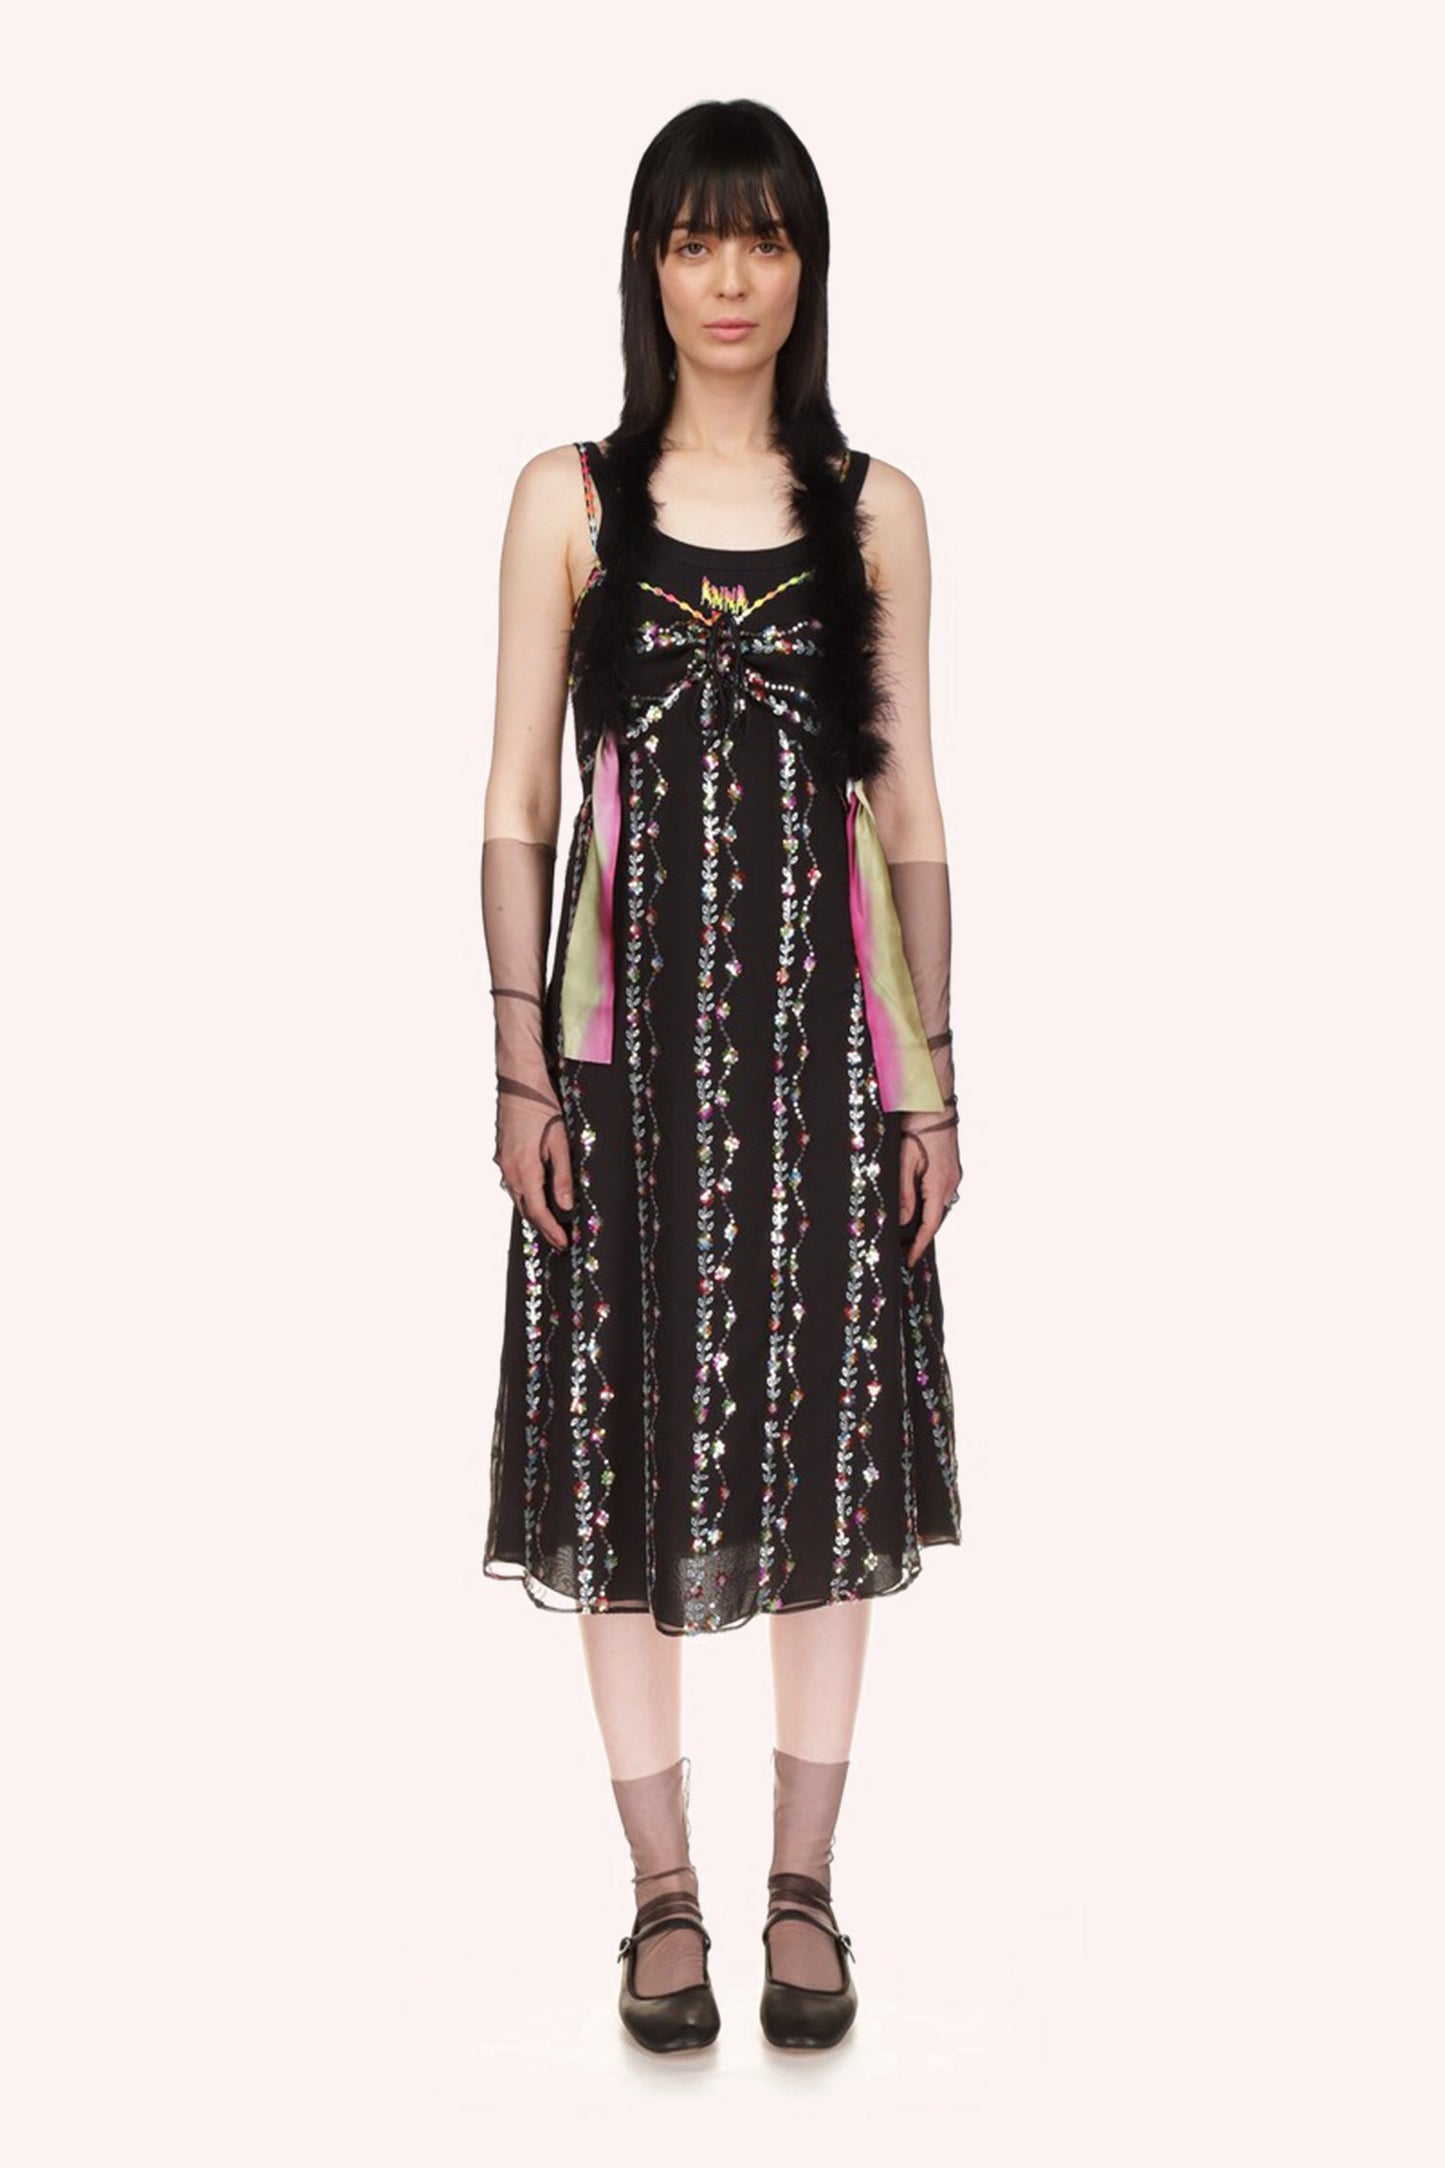 Floral Fantasy Dress, shiny rainbow design is set on a transparent background, mid-calf, sleeves less